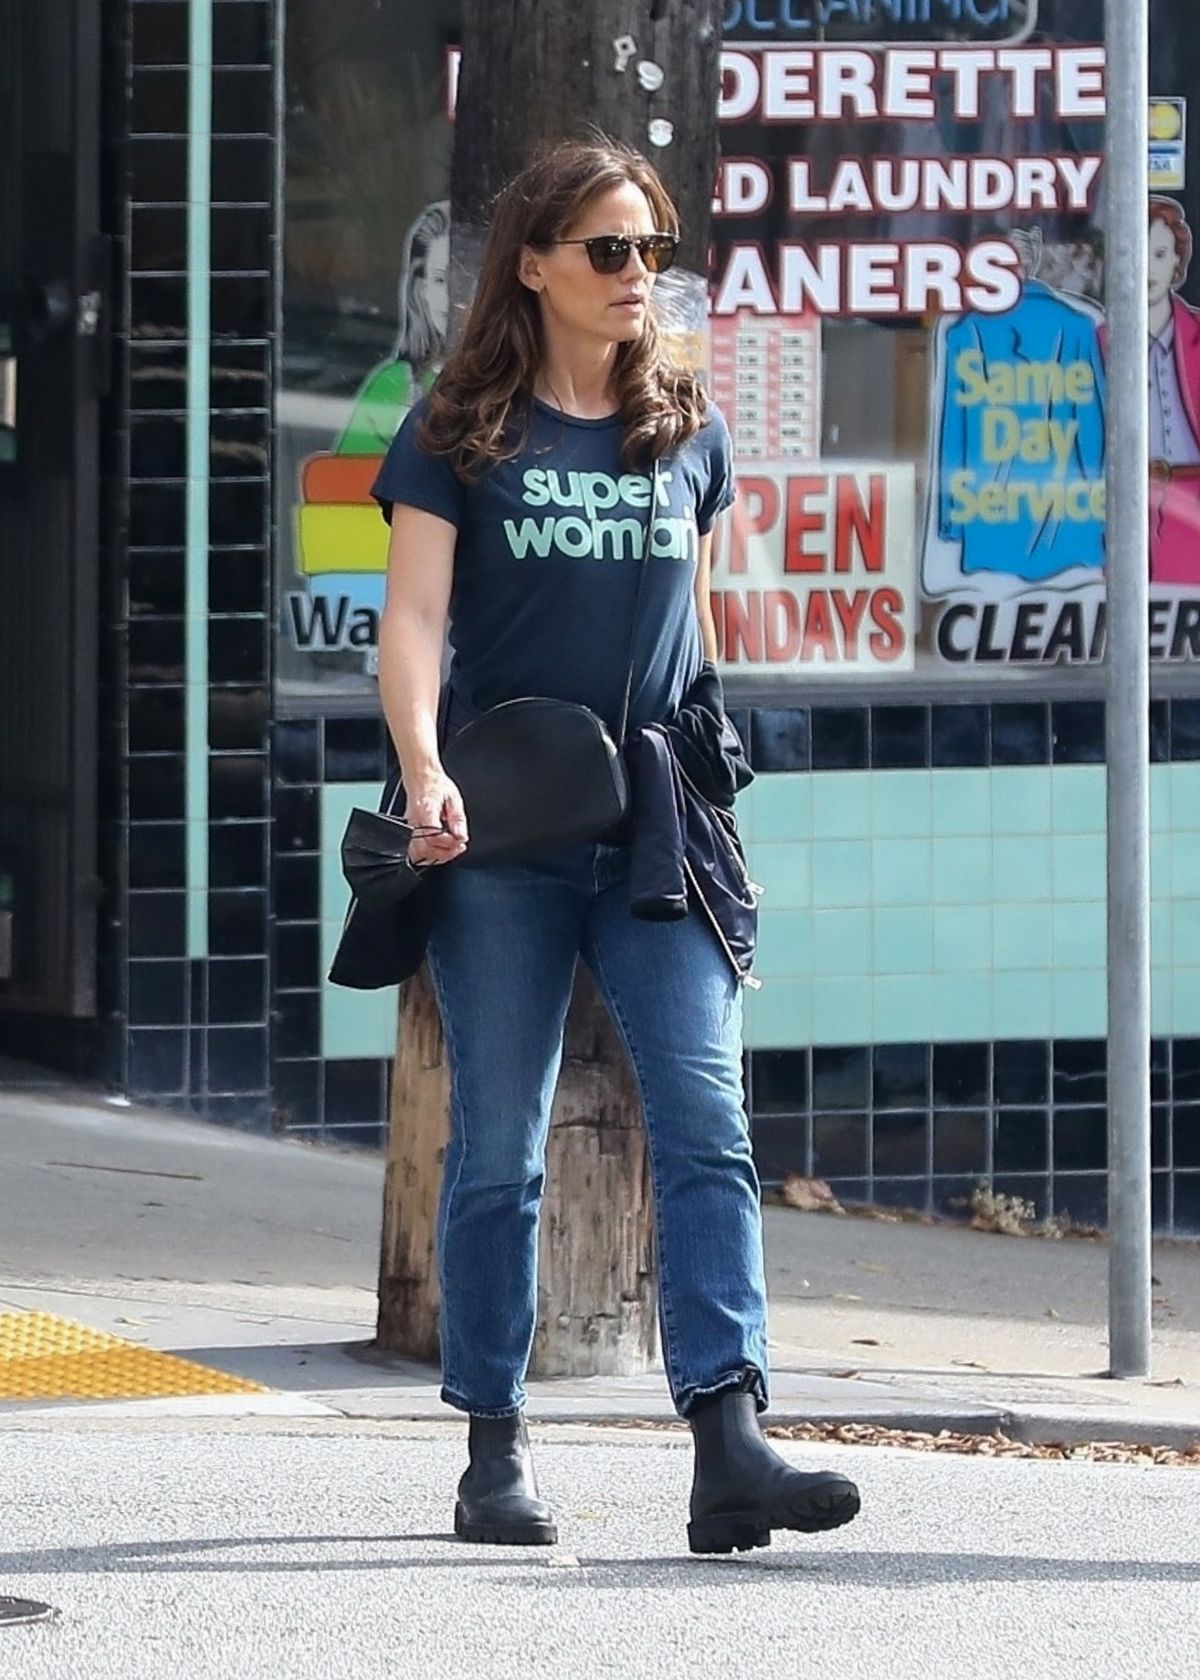 JENNIFER GARNER Out for Lunch with a Friend in San Francisco 08/29/2022.